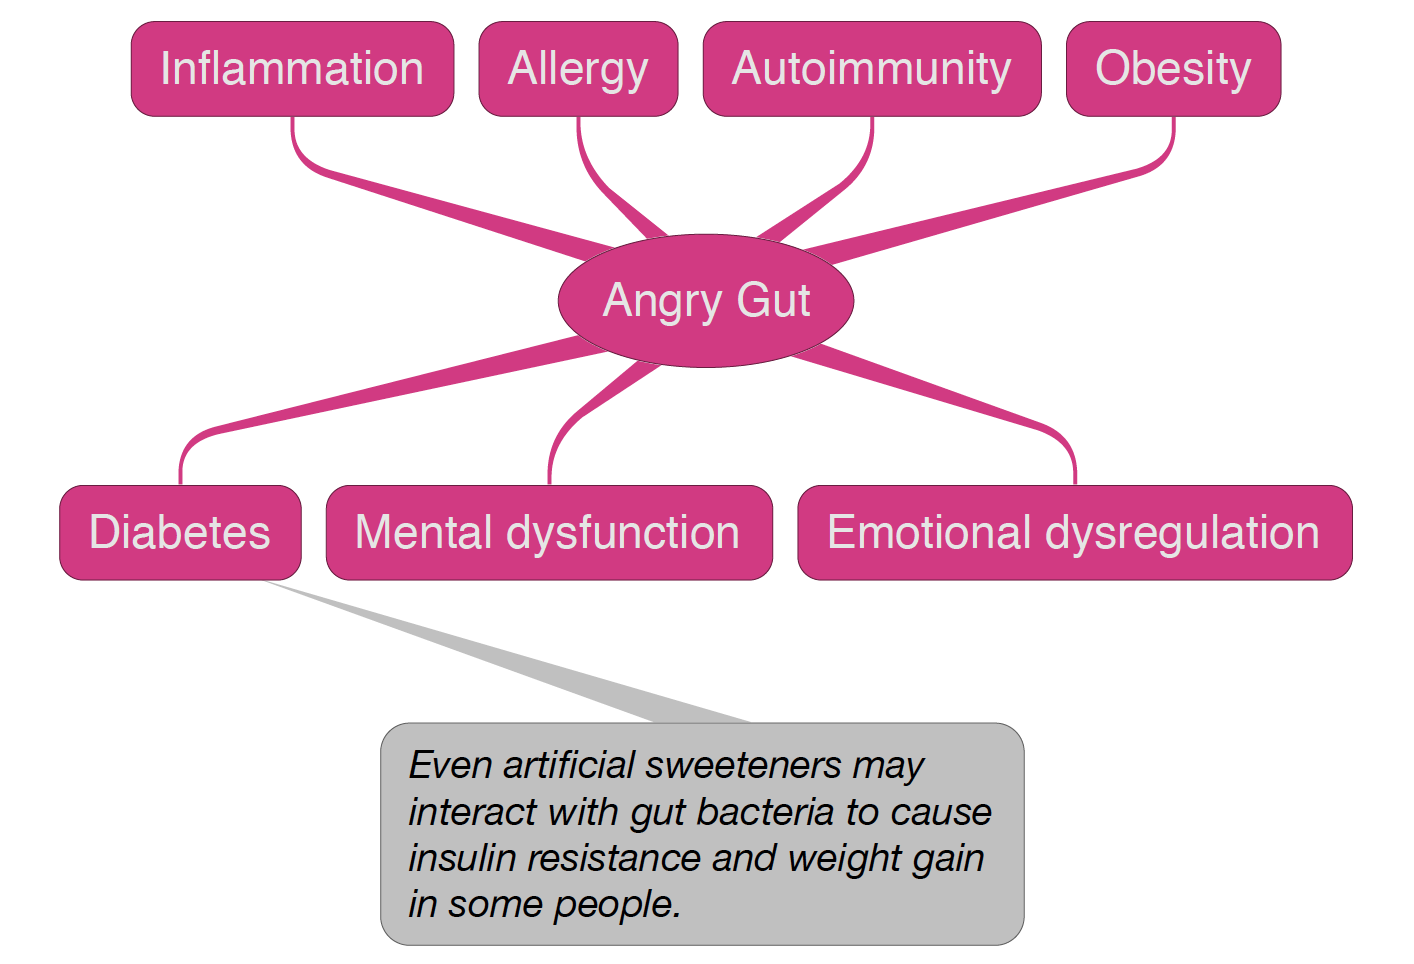 Infographic showing the consequences of an angry gut.